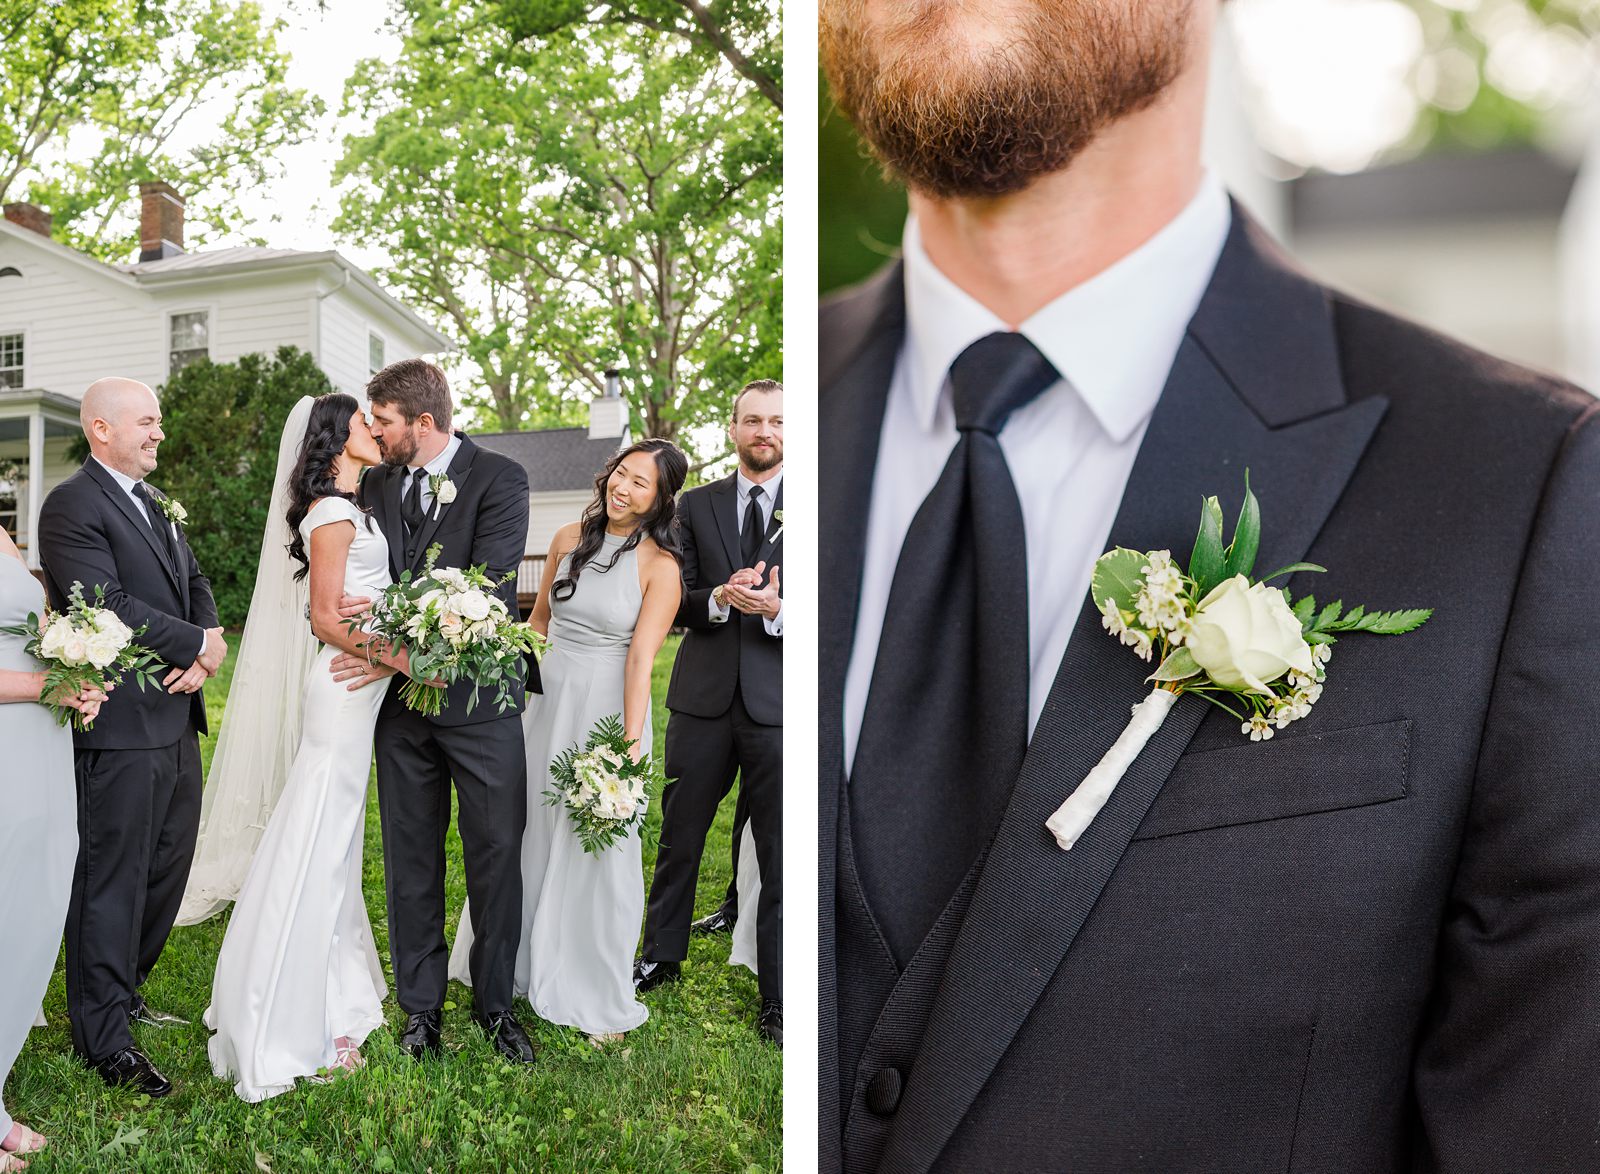 Wedding Party portraits at Spring Wedding by Virginia Wedding photographer Kailey Brianne Photography 